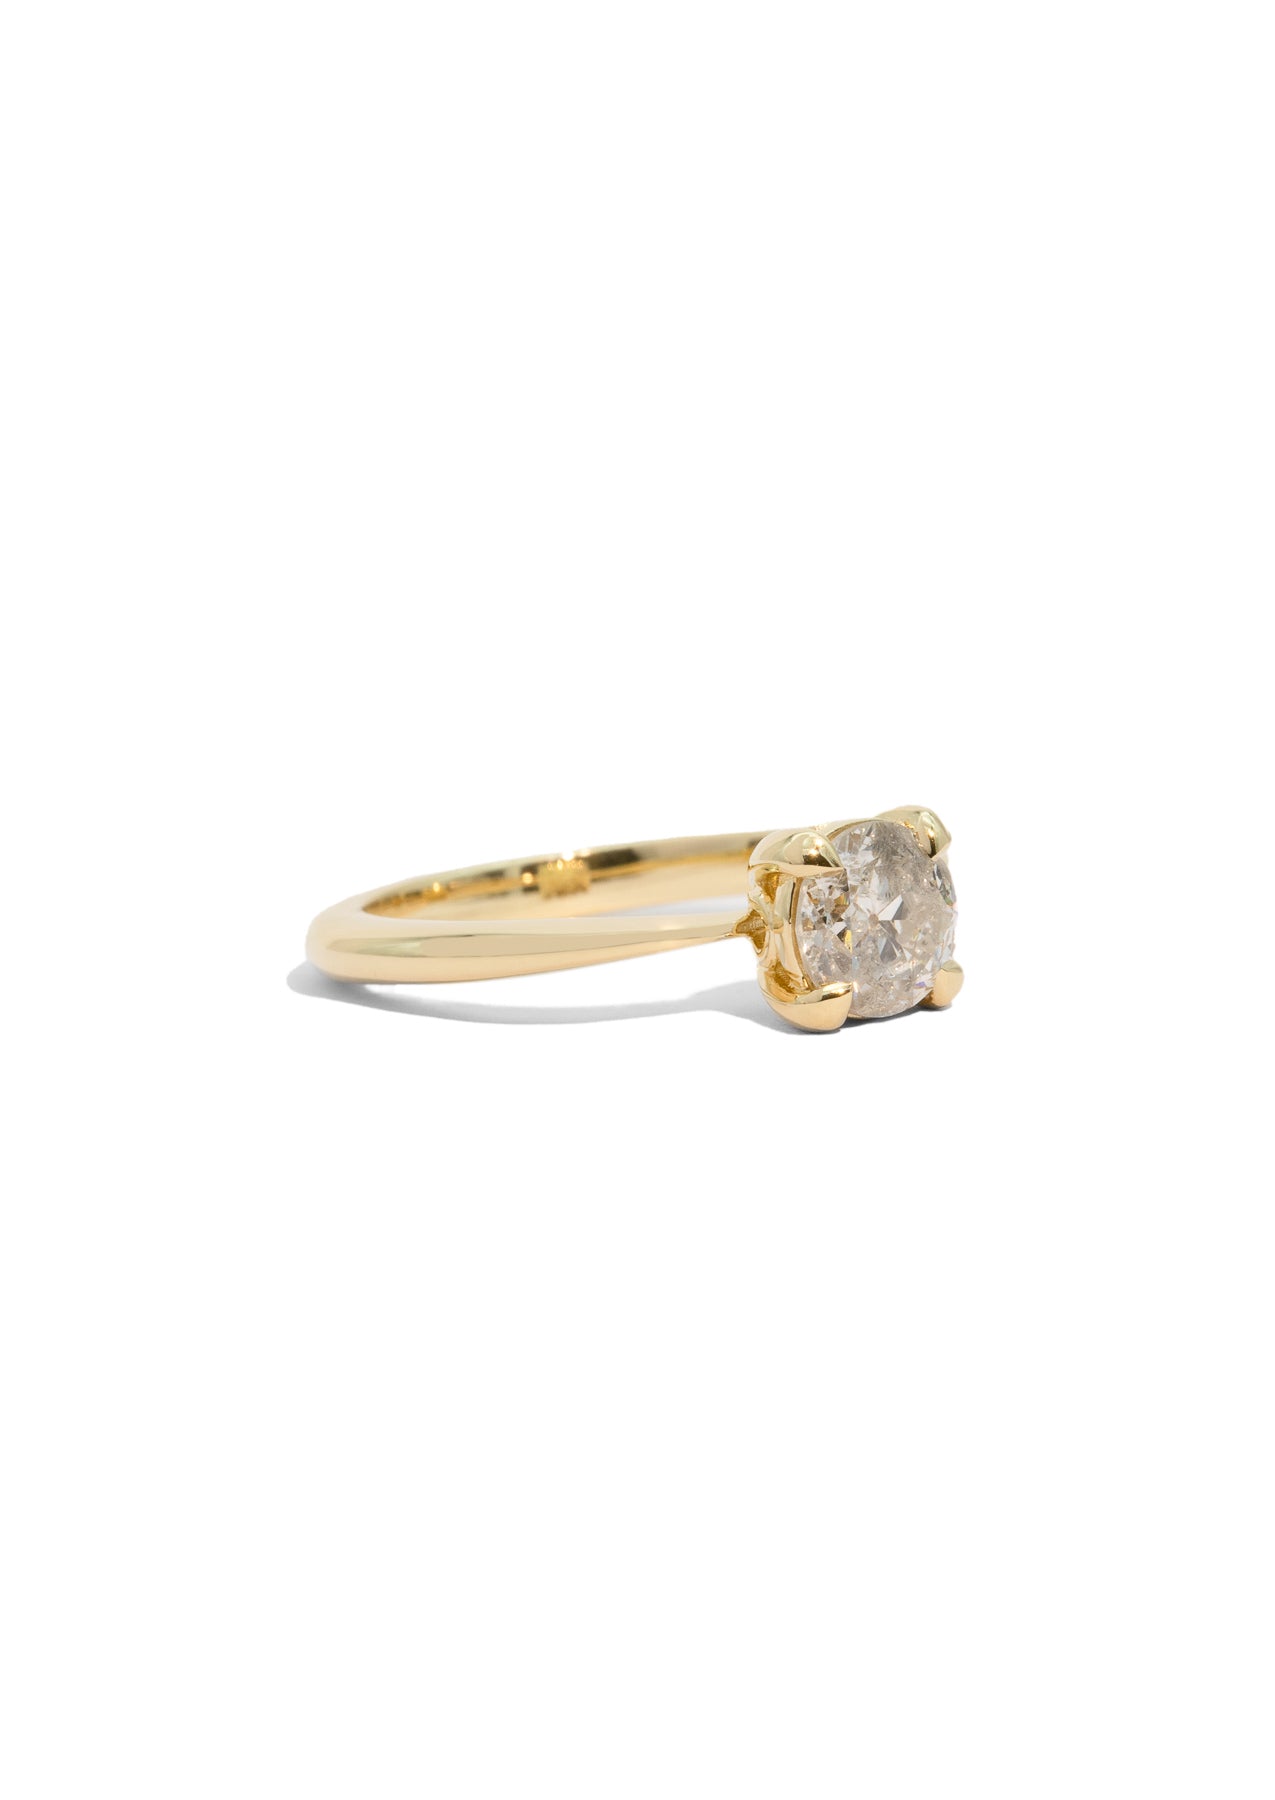 The June Ring with 0.97ct Diamond